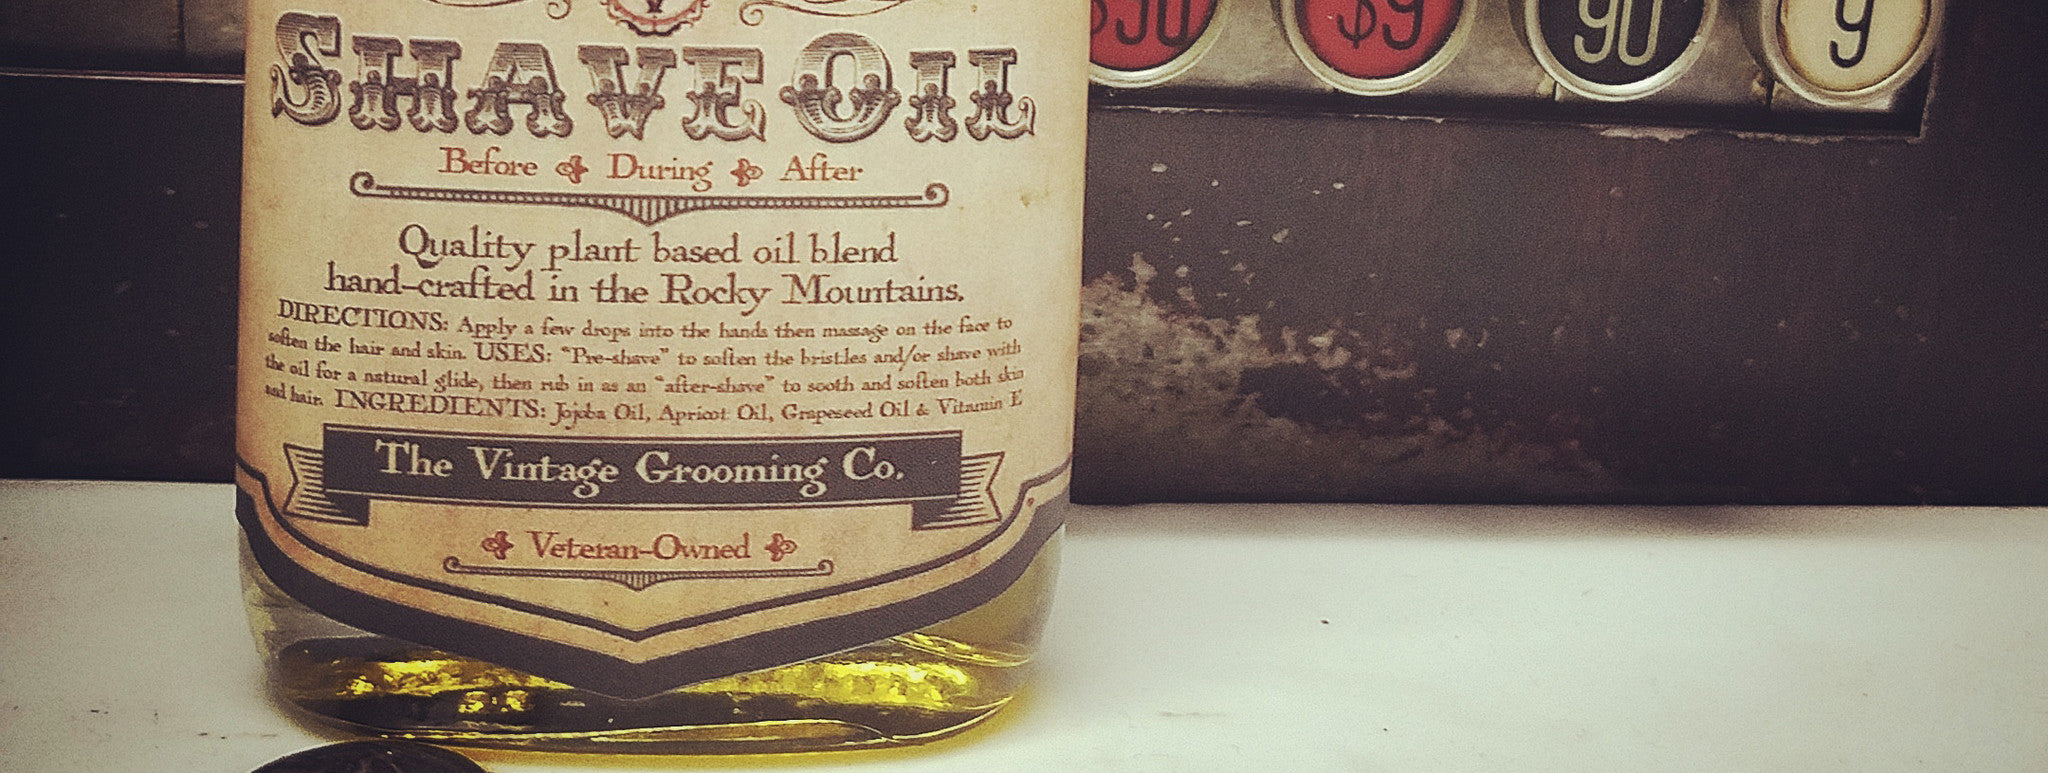 Shave, Oil, Colorado, Natural, Sooth, Soothing, Plant, Vintage, Grooming, Brand, Beard, Company, Shave, Shaving, Veteran, Best, Glide, Top, Industry, New, Blog, Amazon, Wholesale, Barbershop, Salon, Barber